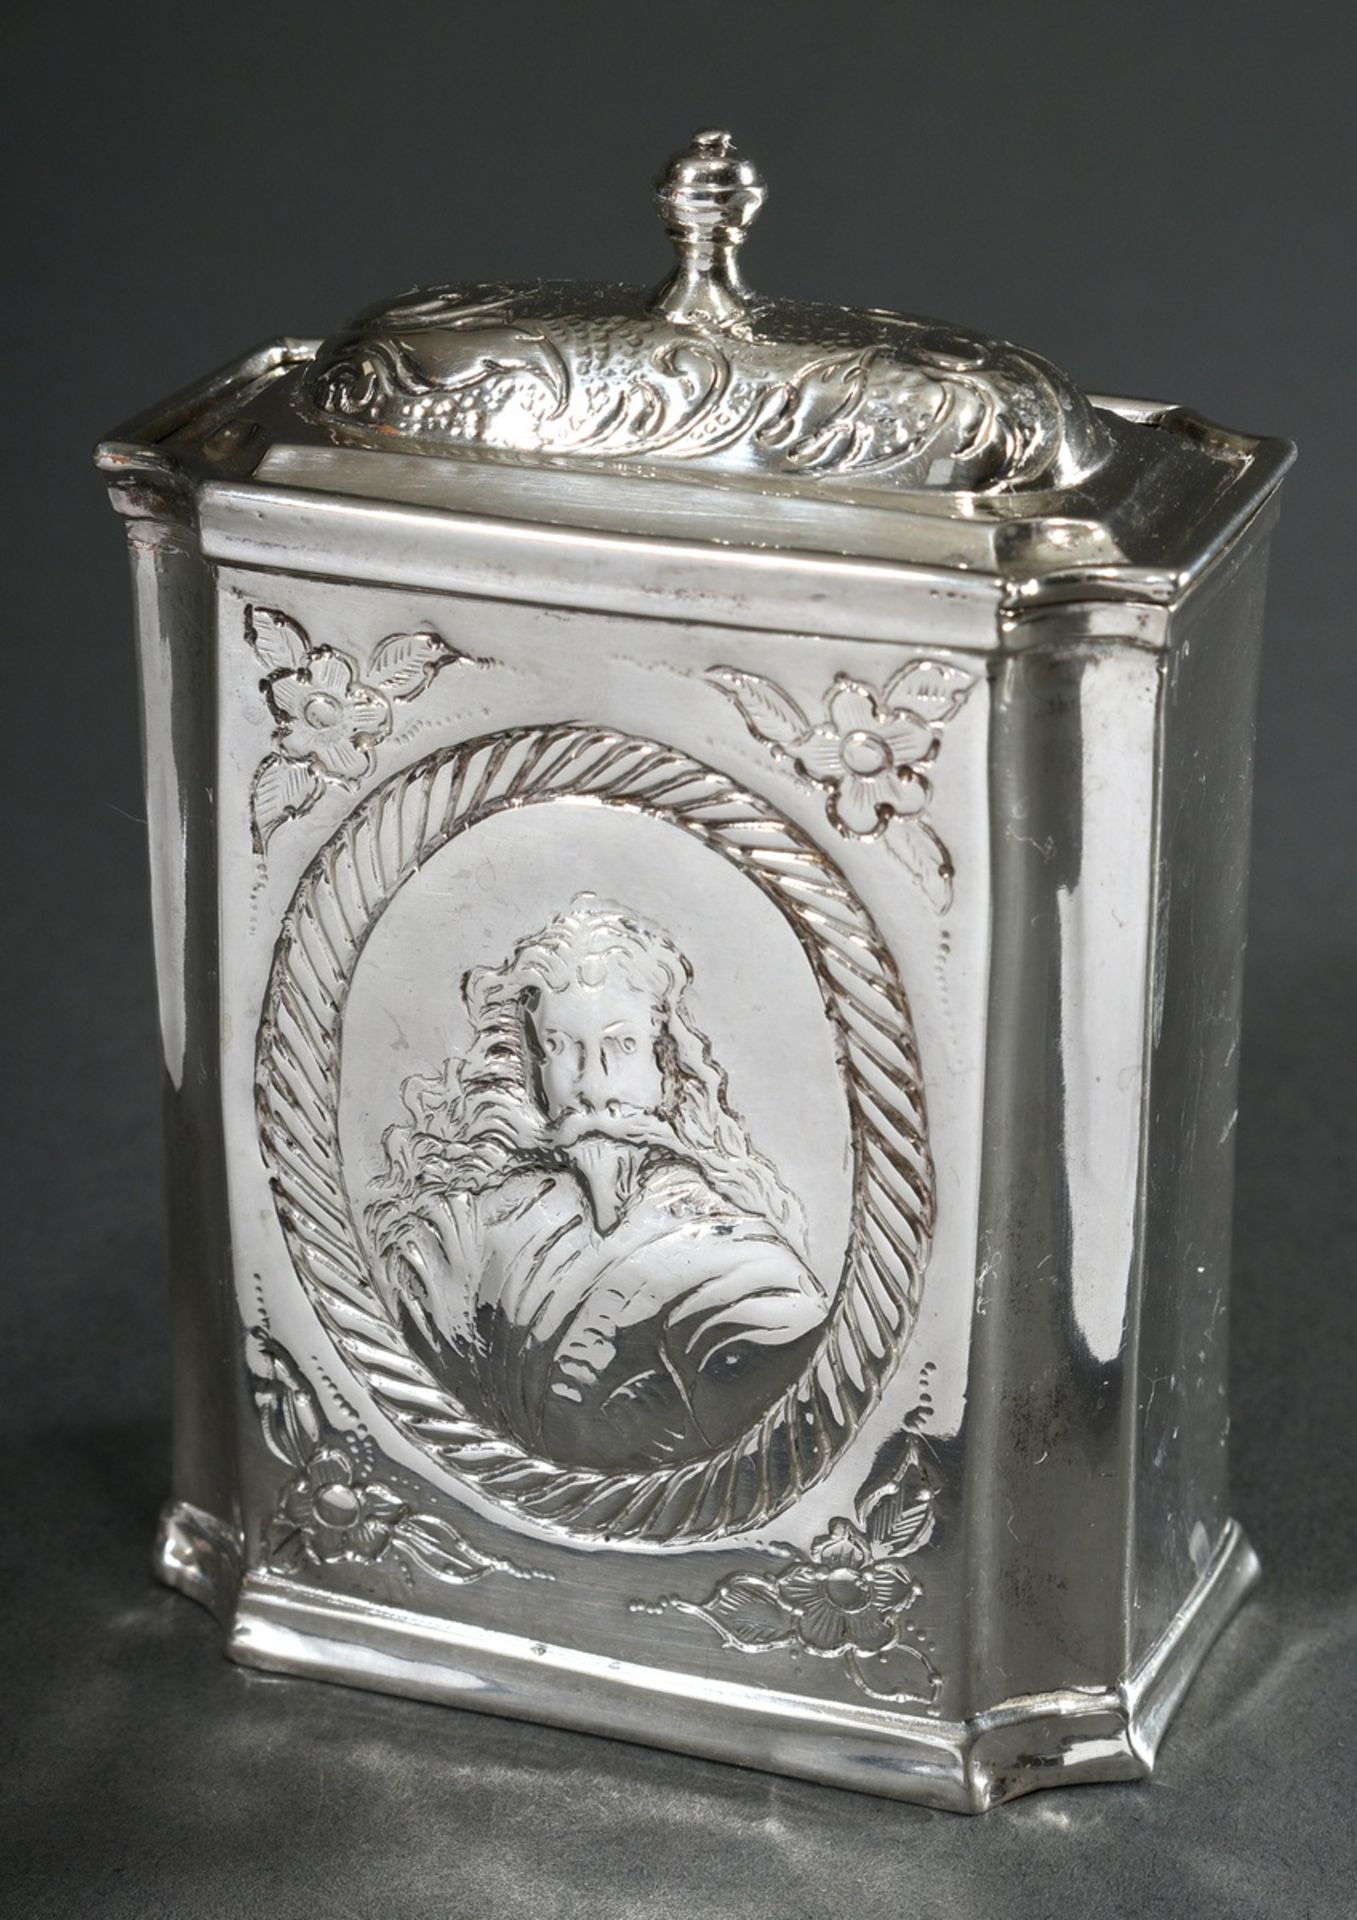 Lübeck tea caddy with sliding lid and two portrait medallions "Lord and Lady" in oval cartouches wi